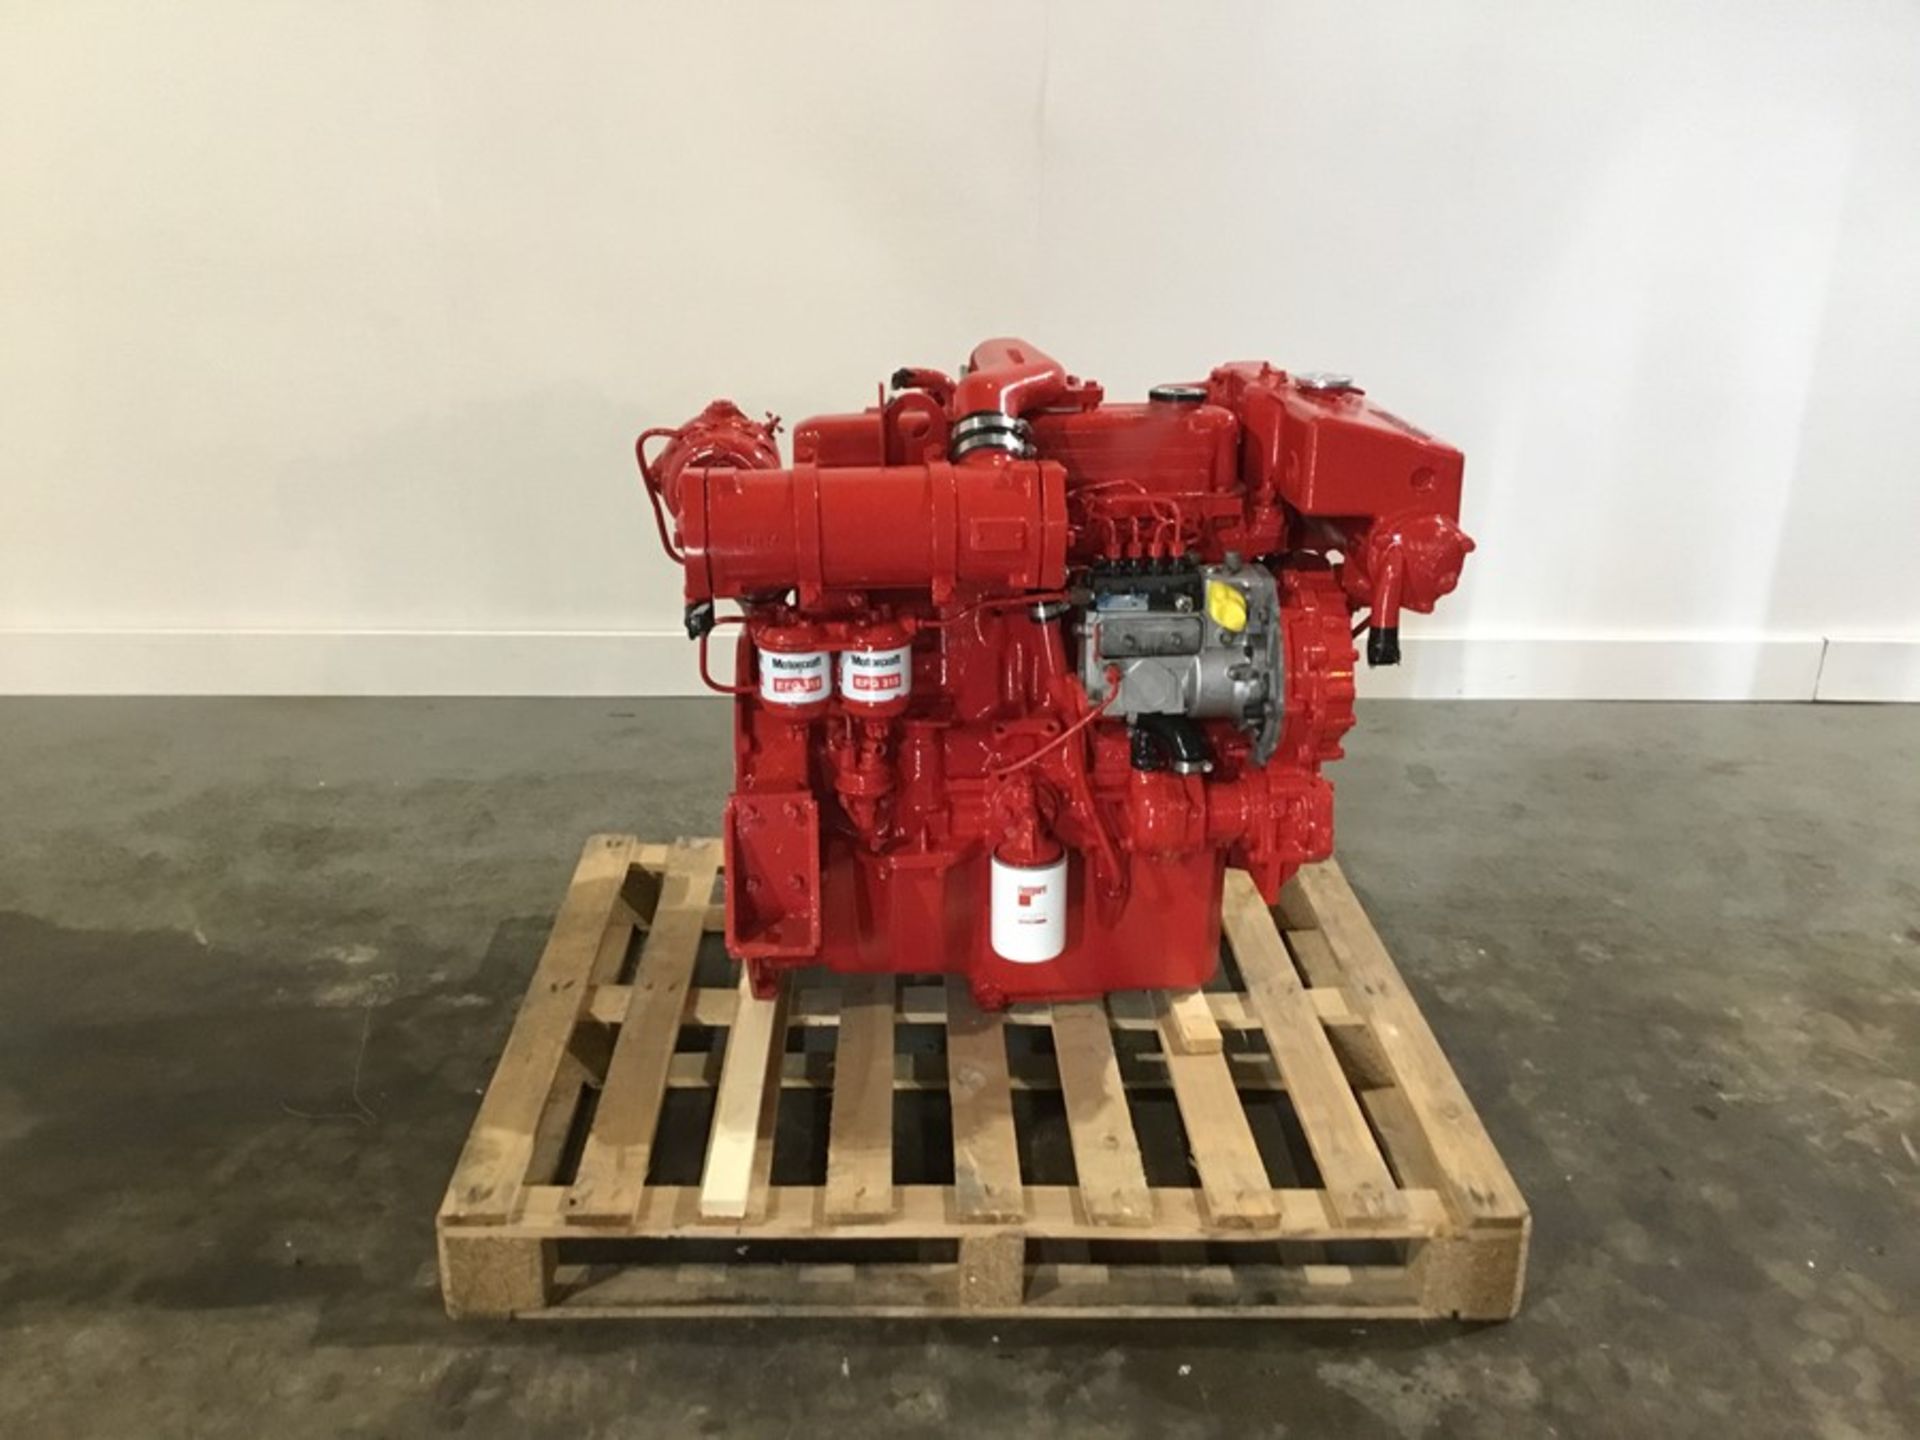 Ford 2722E Marine Diesel engine: Ford 2722e 4cyl Turbo 140Hp @2500Rpm used low hours - Image 13 of 18